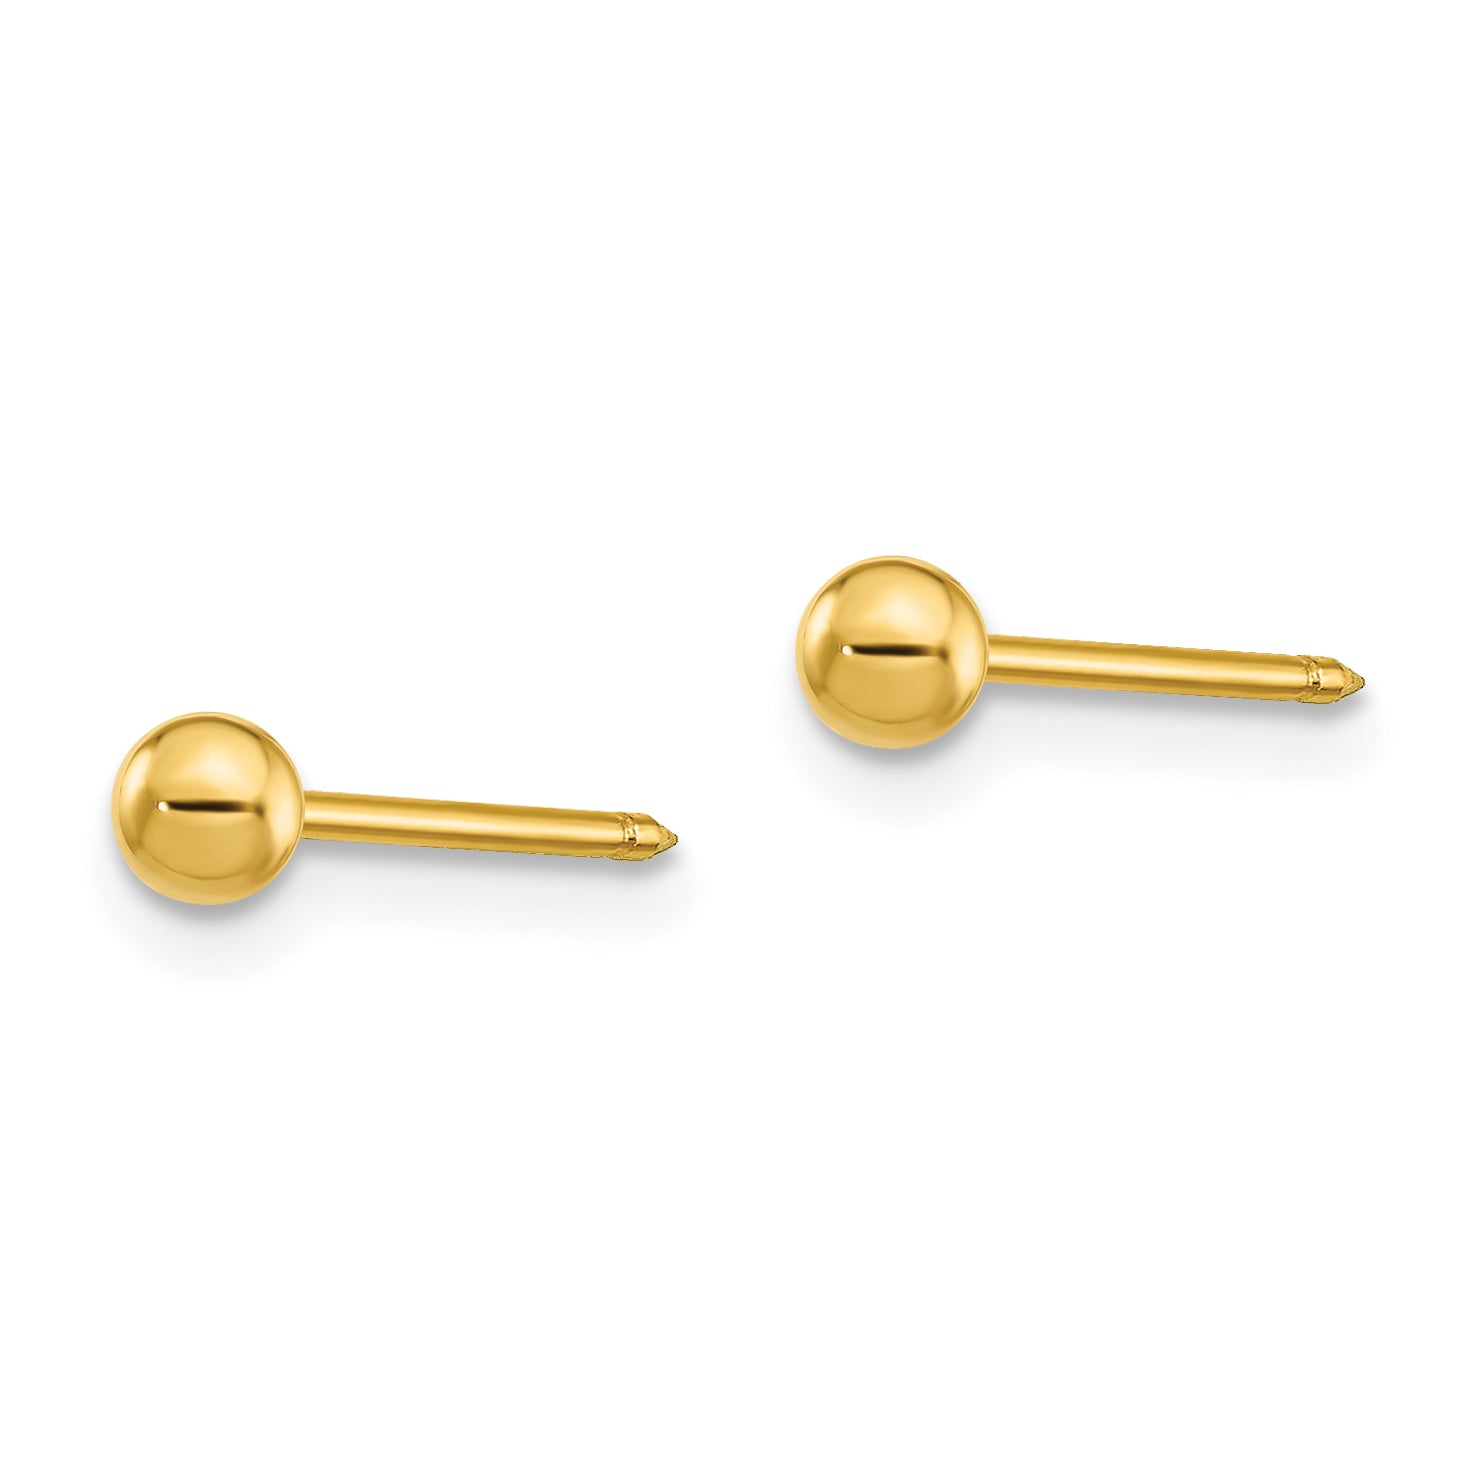 Inverness 24k Plated 3mm Ball Post Earrings